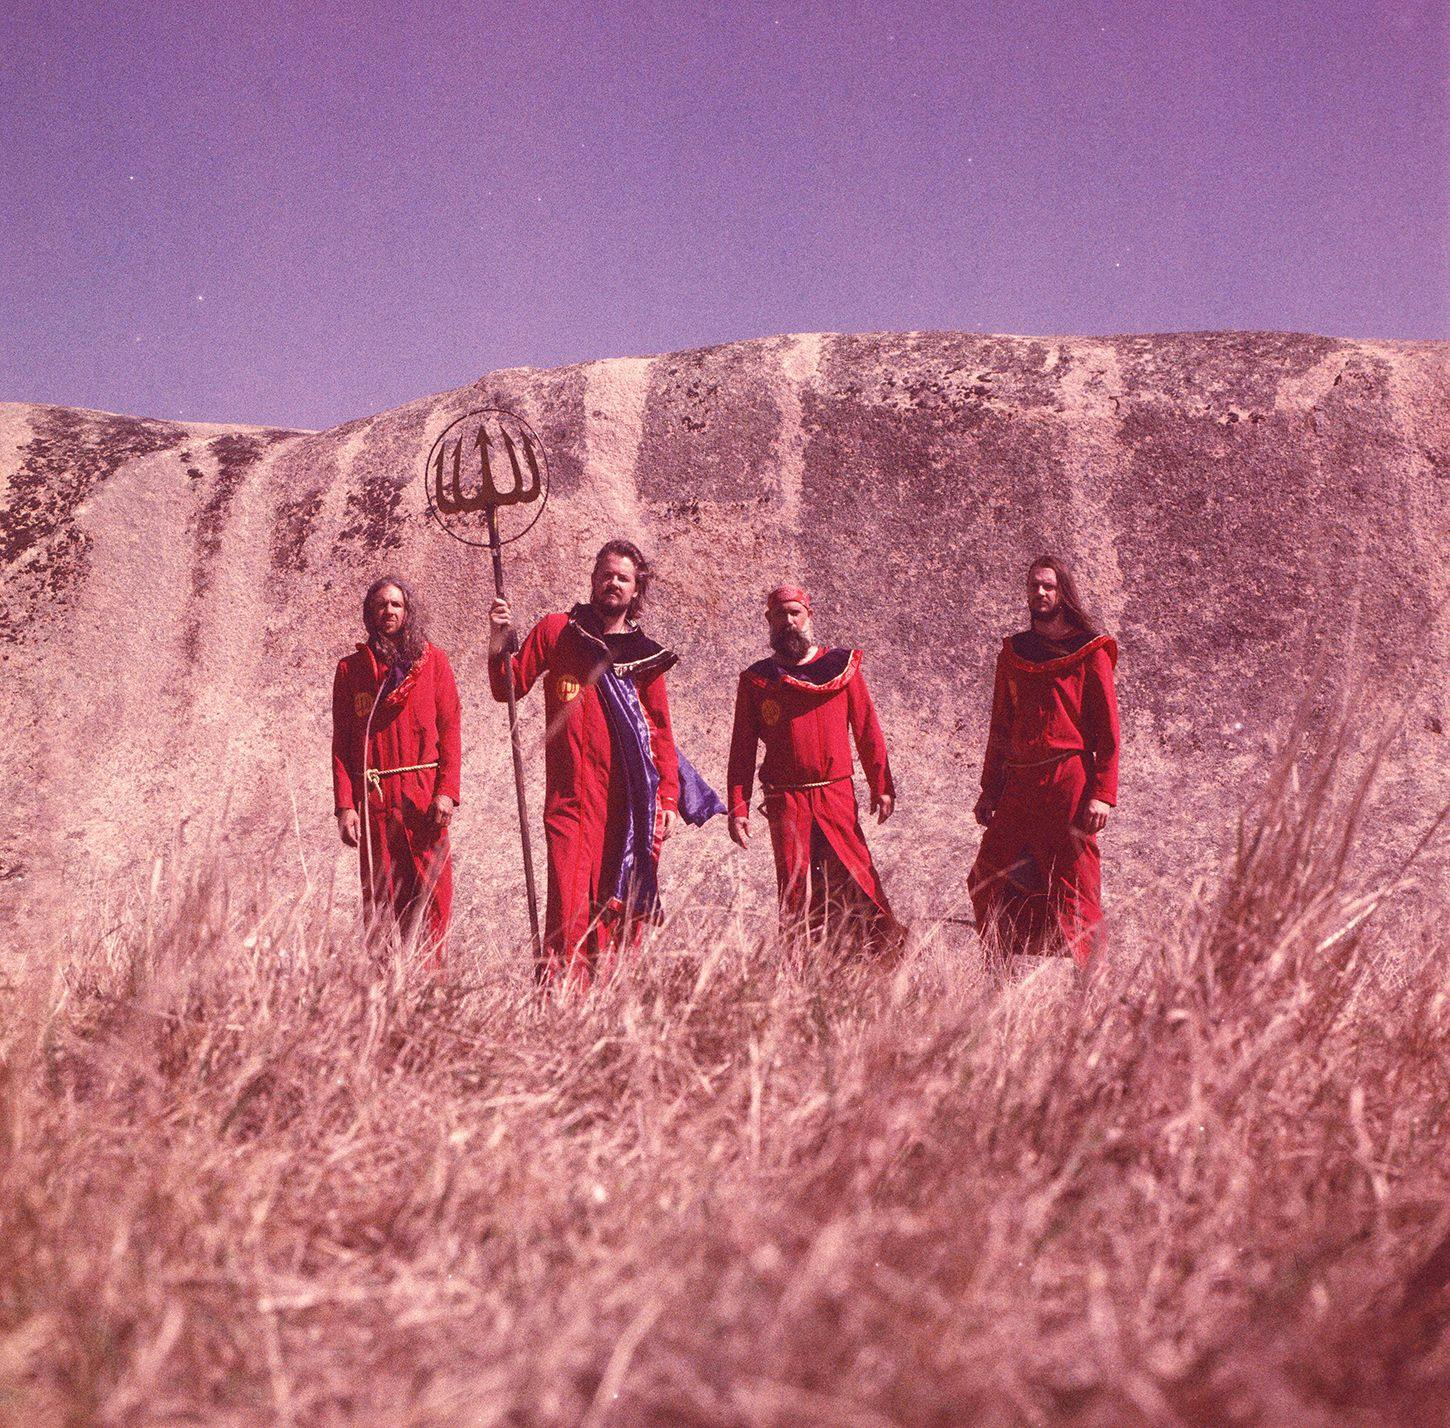 A group of men in red robes standing in a field.